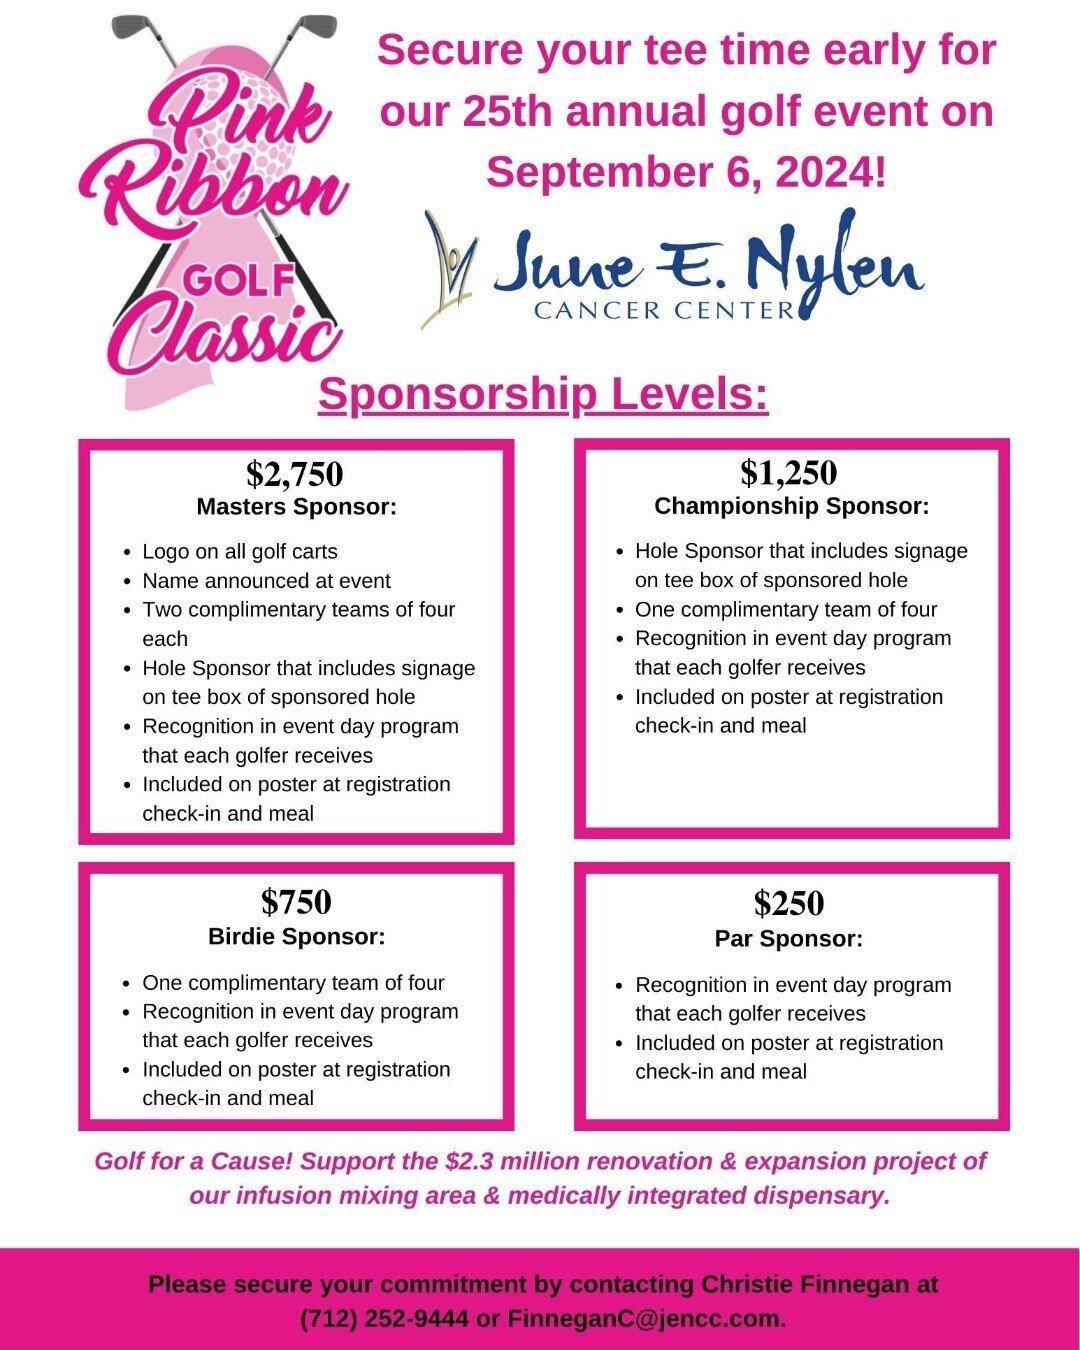 Has this weather got you thinking about golf? Well, it's not too early to already lock in your spot in our Annual Pink Ribbon Golf Classic on September 6. We have sold out the last few years and since this is Year #25 our committee will be working ev